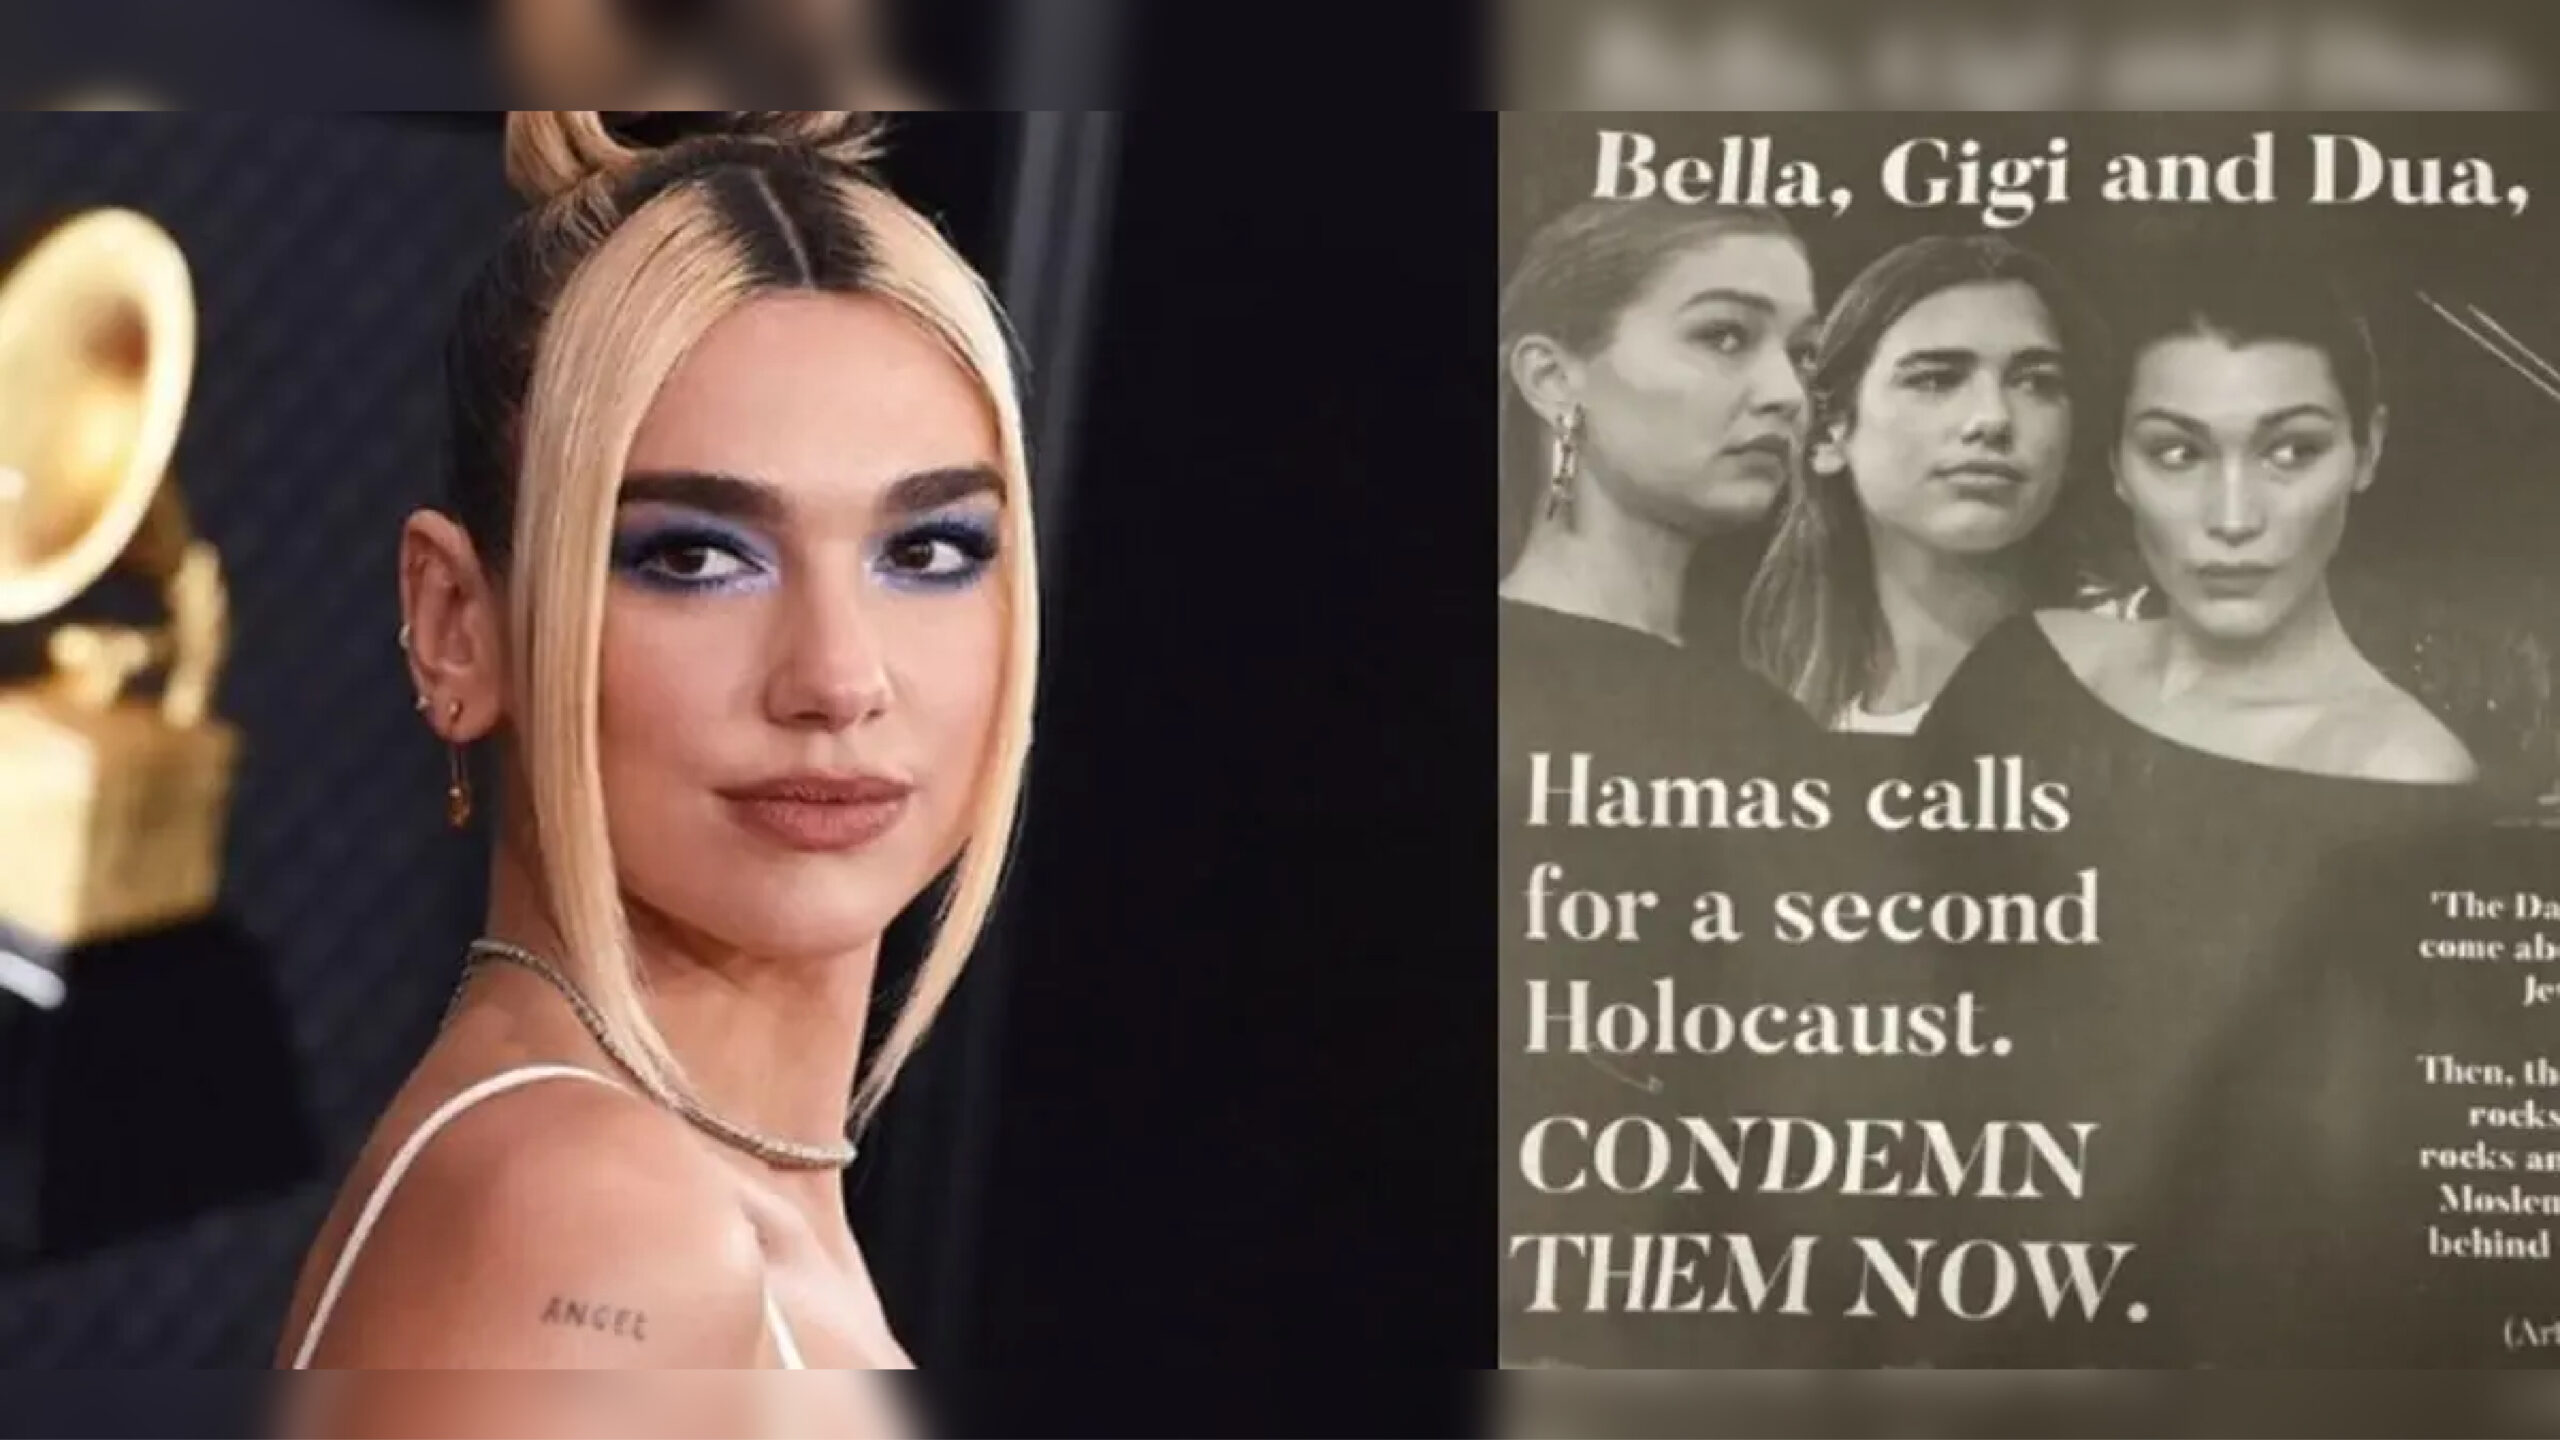 A full page ad links pop star Dua Lipa and Hadid sisters, levitating singer fights back